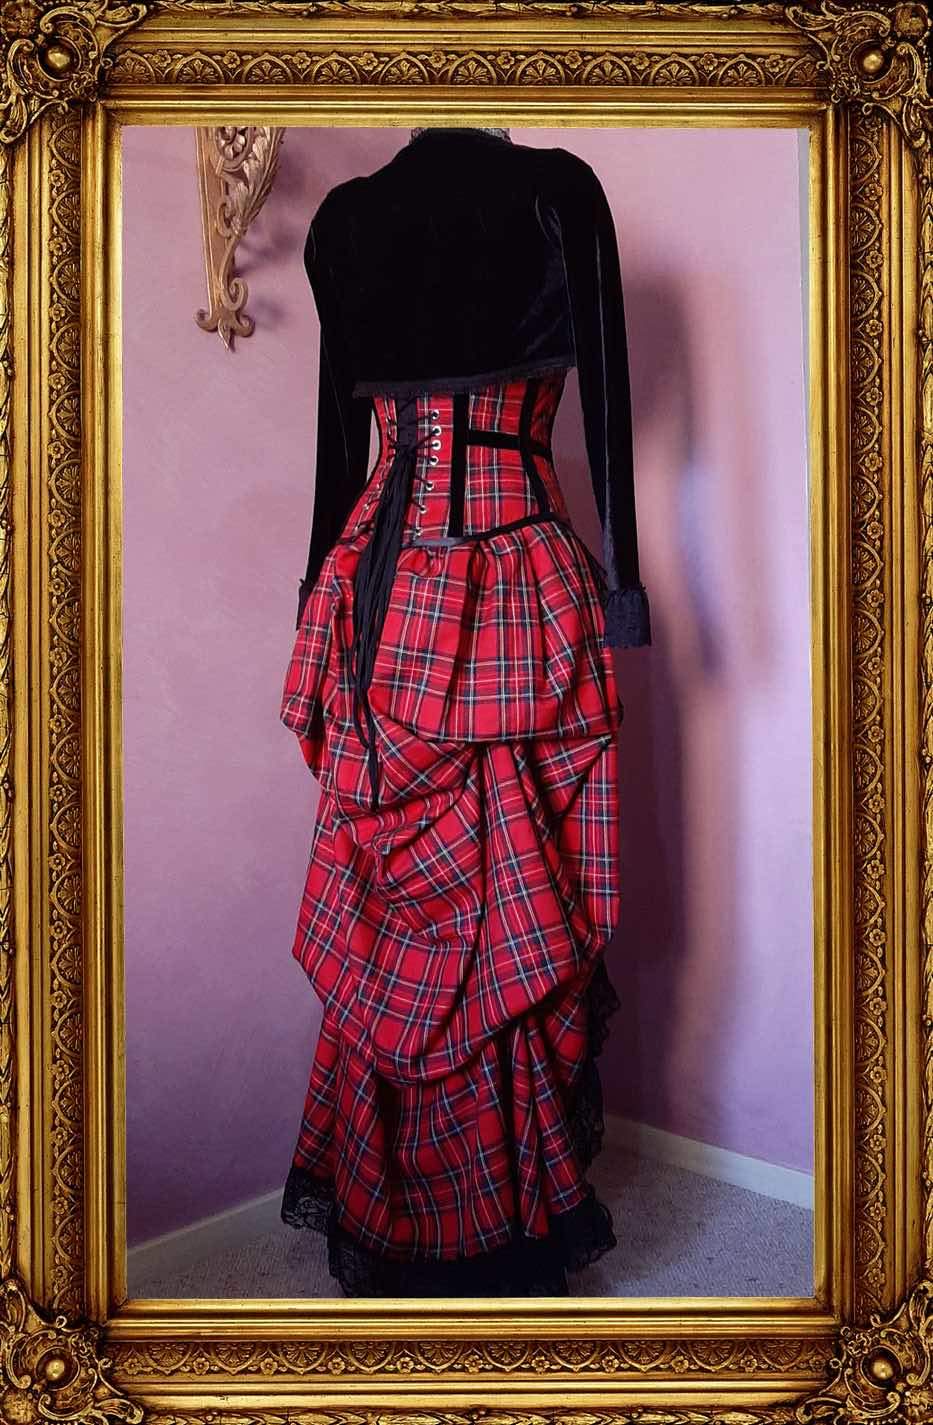 red stewart tartan victorian bustle skirt with matching corset and black bolero shown from the back view